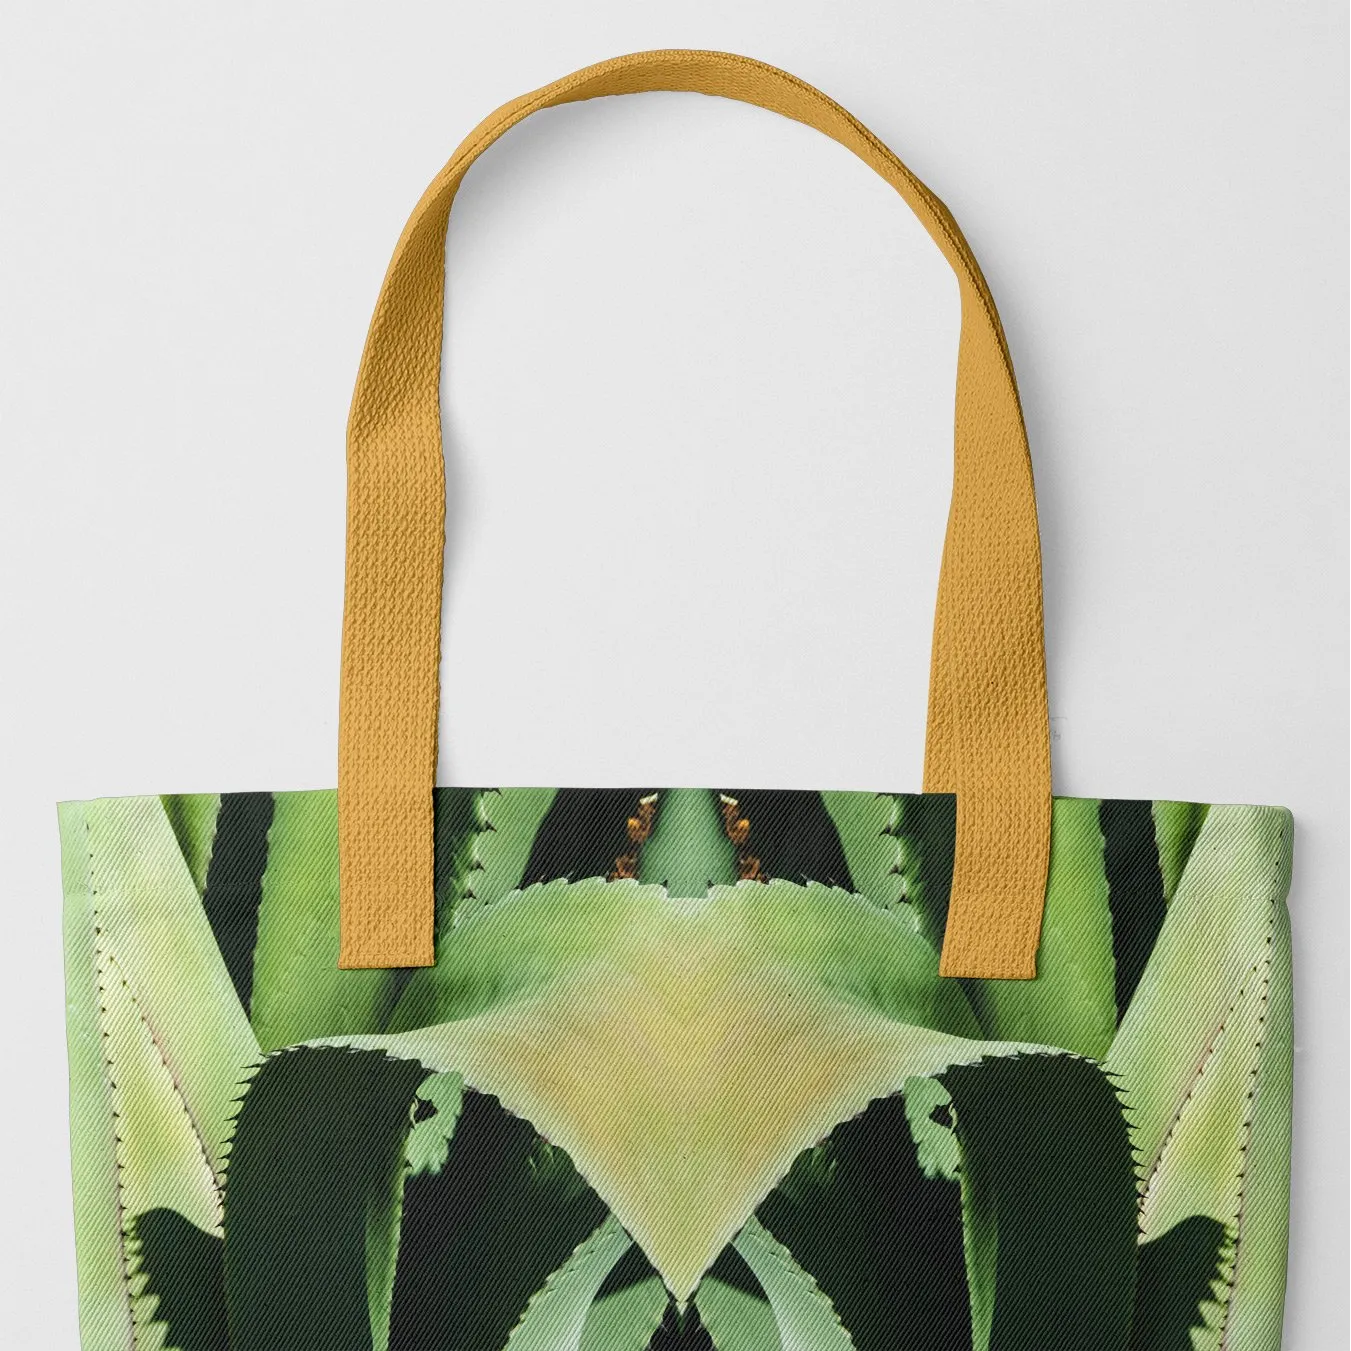 Oh So Succulent Tote - Heavy Duty Reusable Grocery Bag - Yellow Handles - Shopping Totes - Aesthetic Art